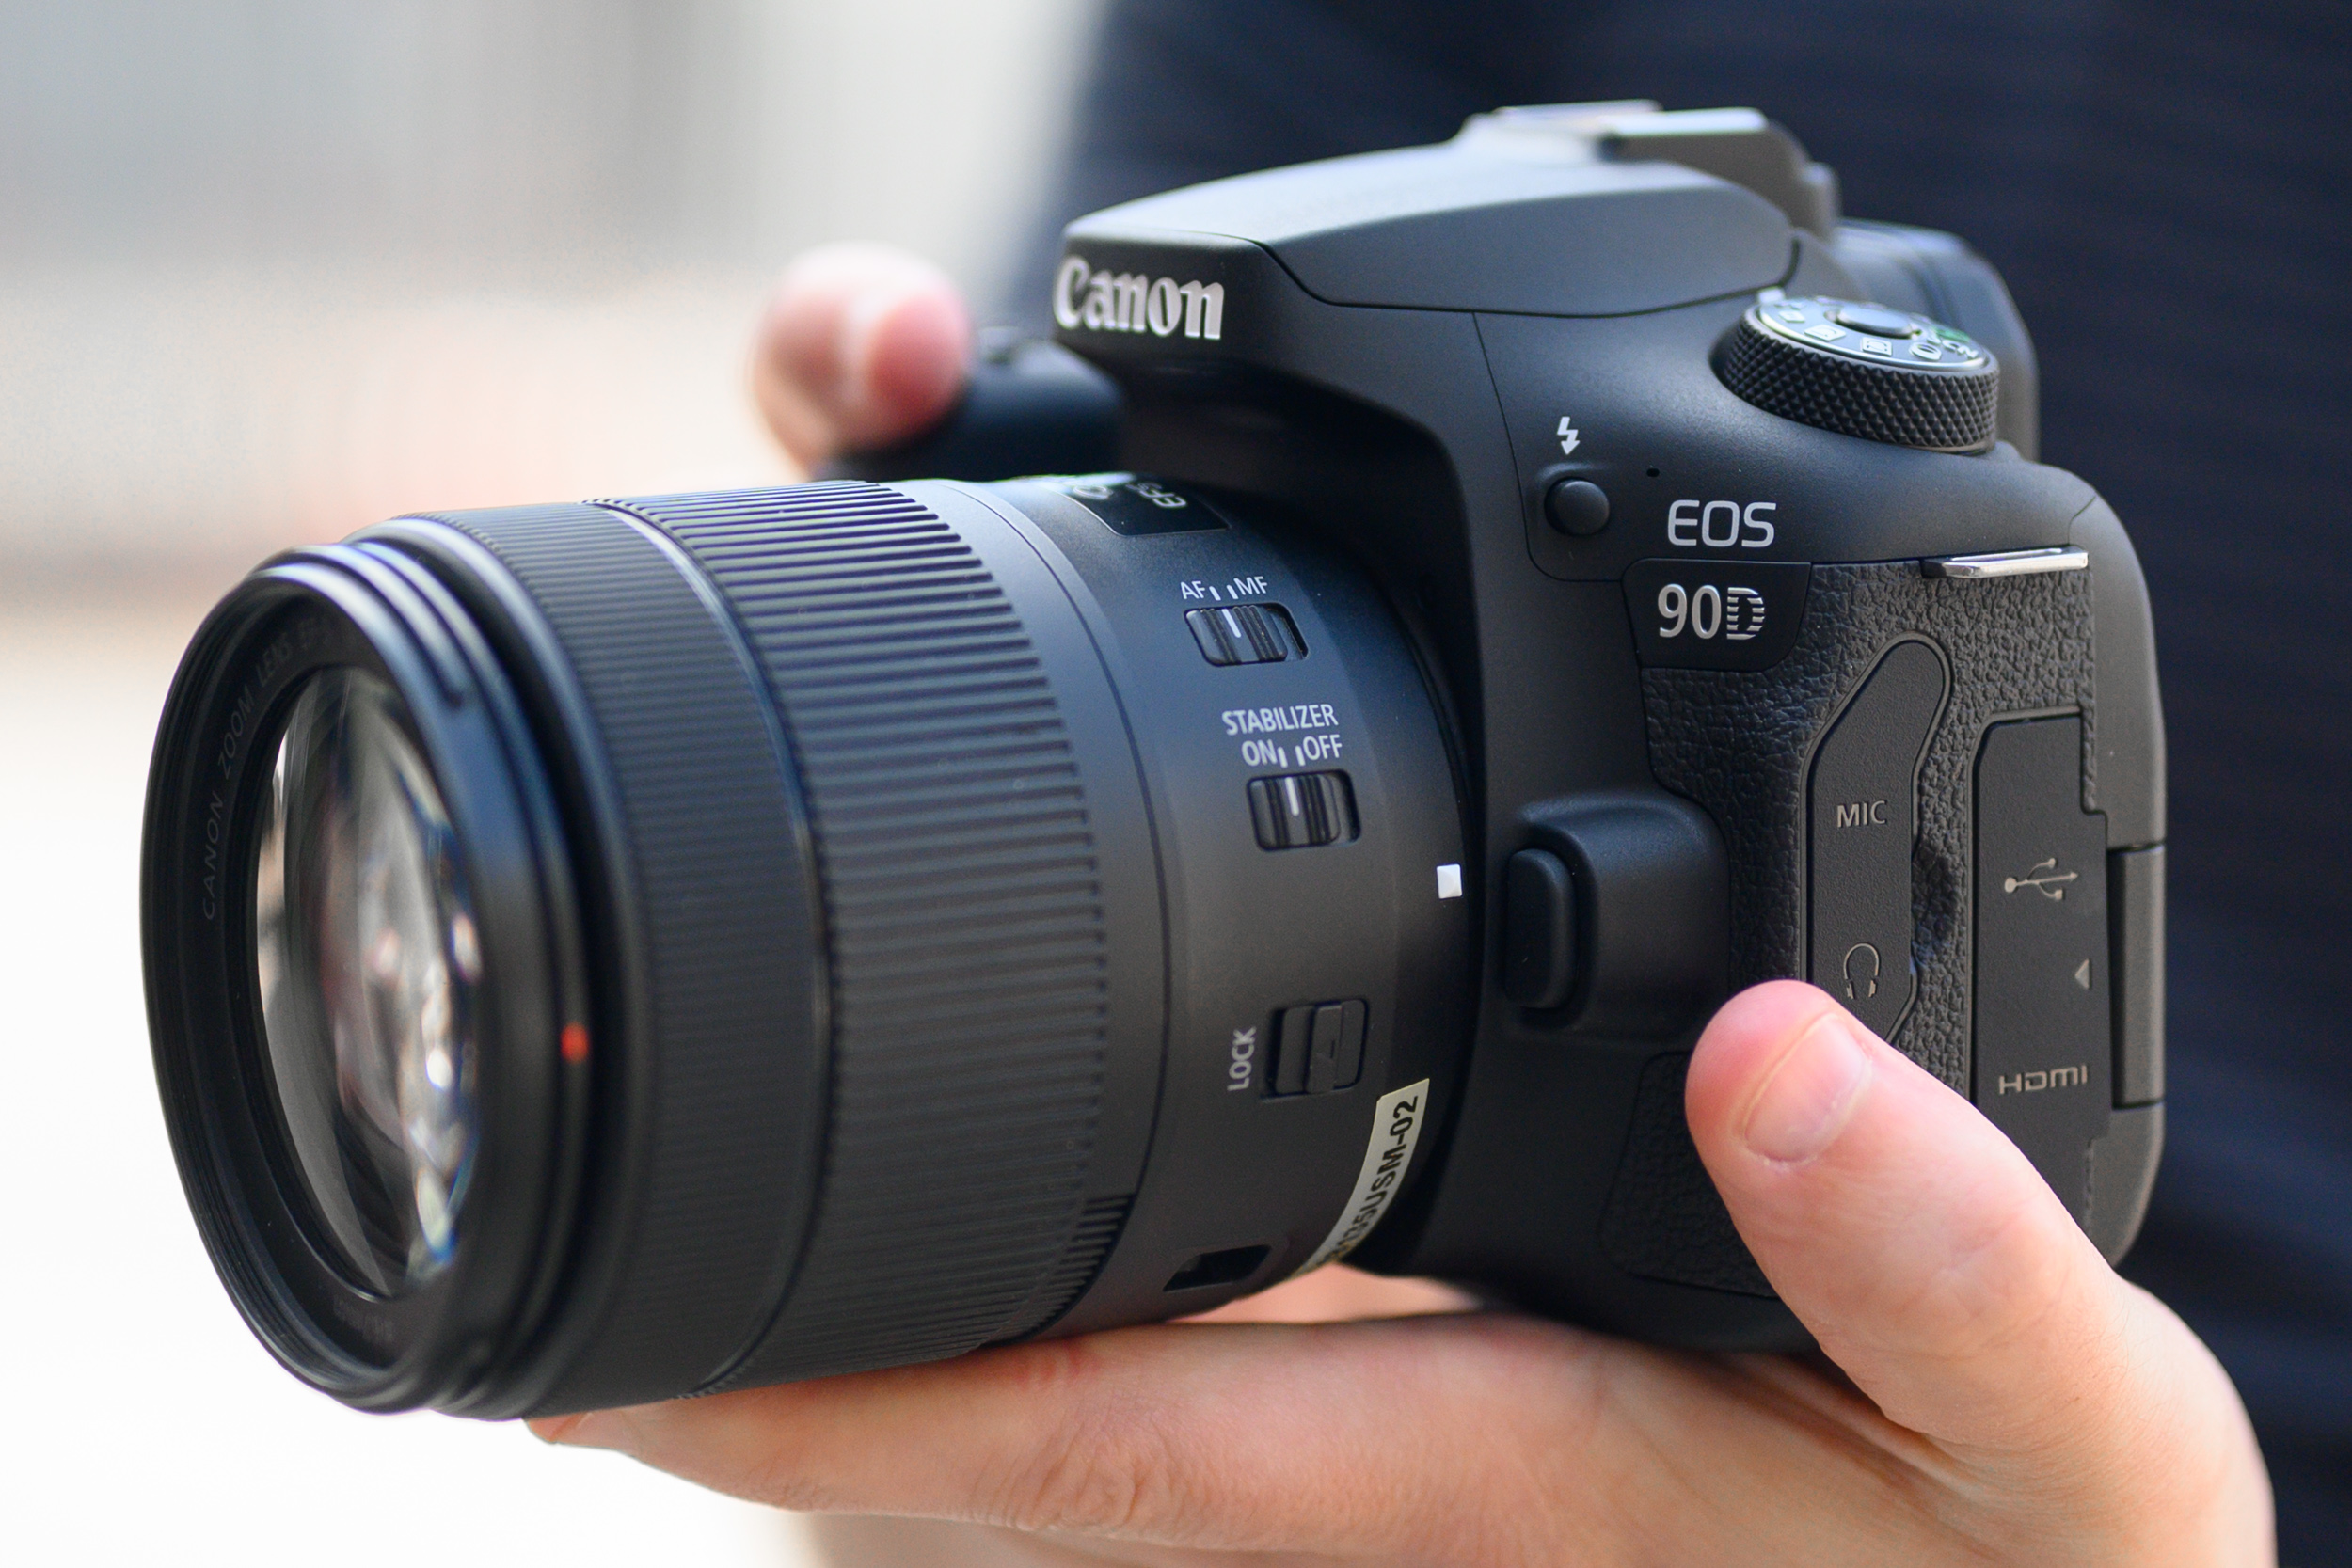 A hand holding the Canon EOS 90D camera